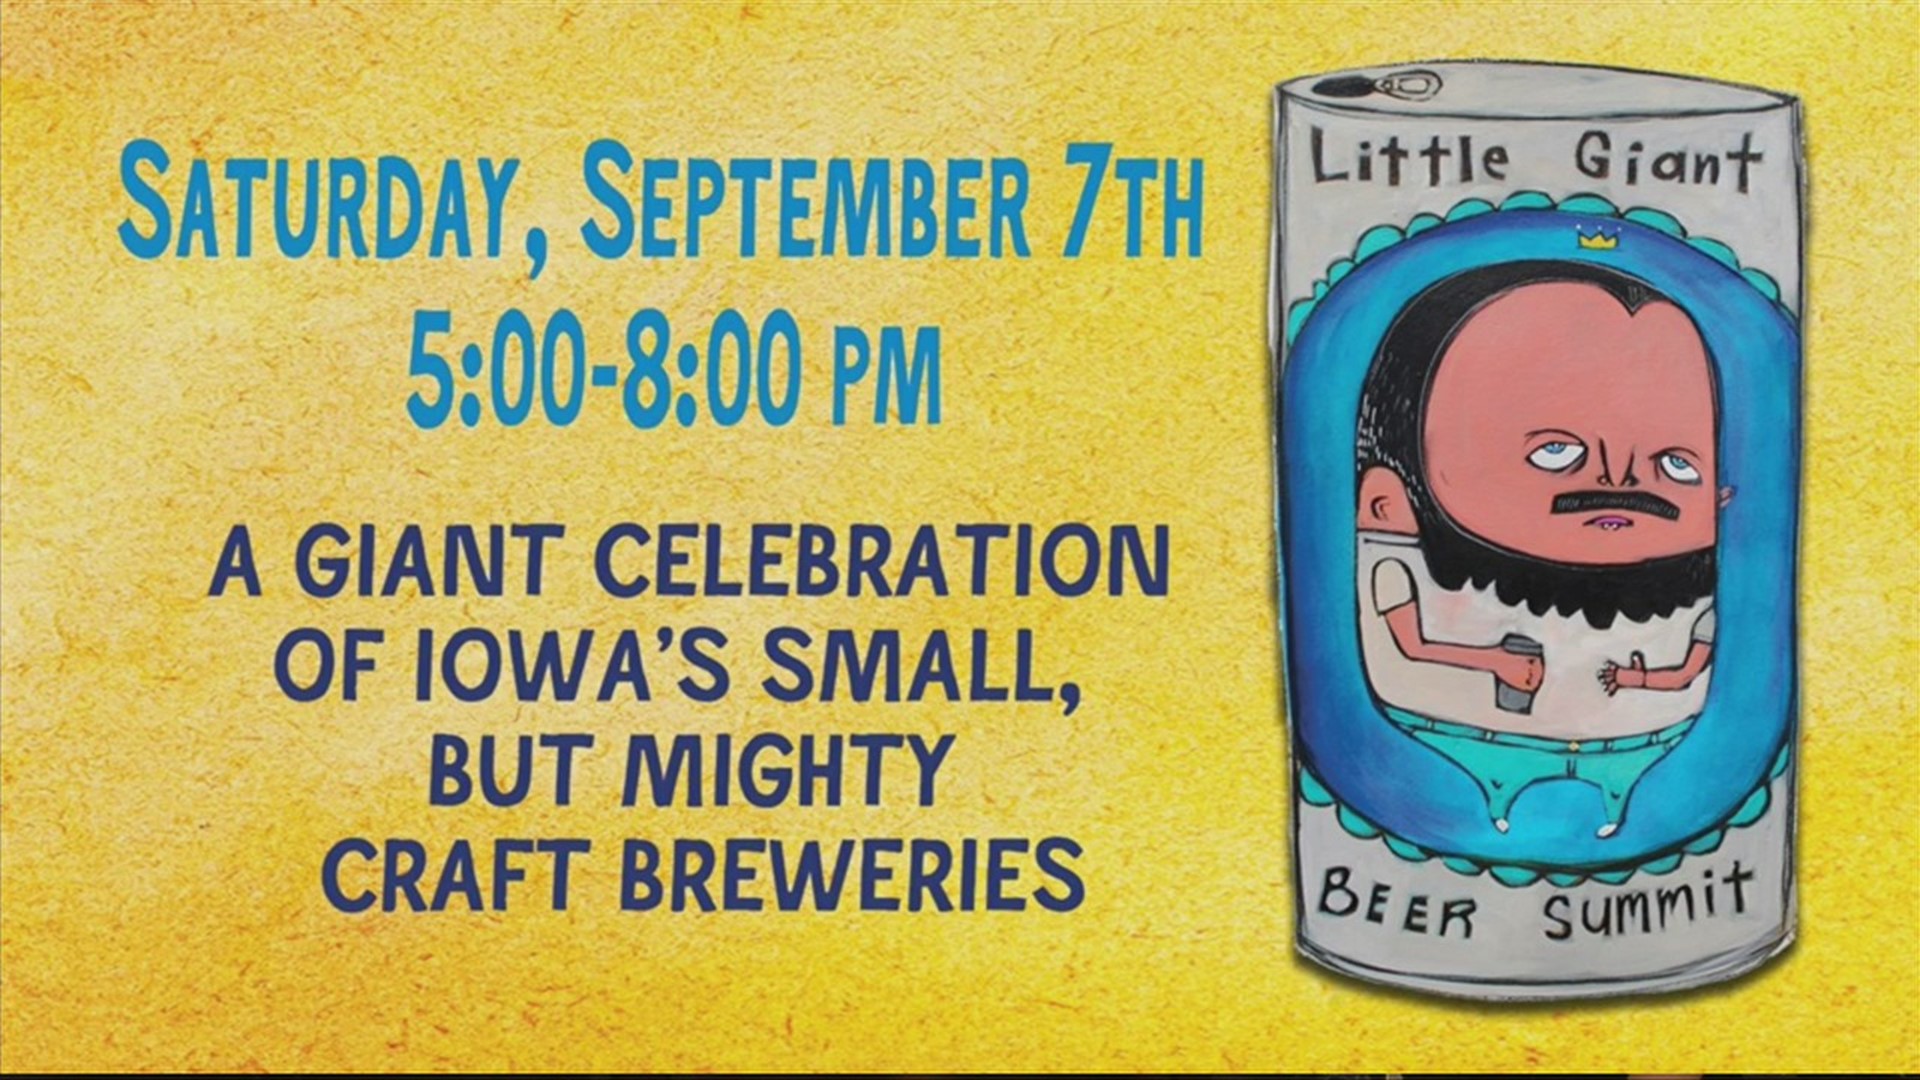 This weekend, you can help celebrate Iowa's breweries as the 7th annual Little Giant Beer Summit returns to el Bait Shop.